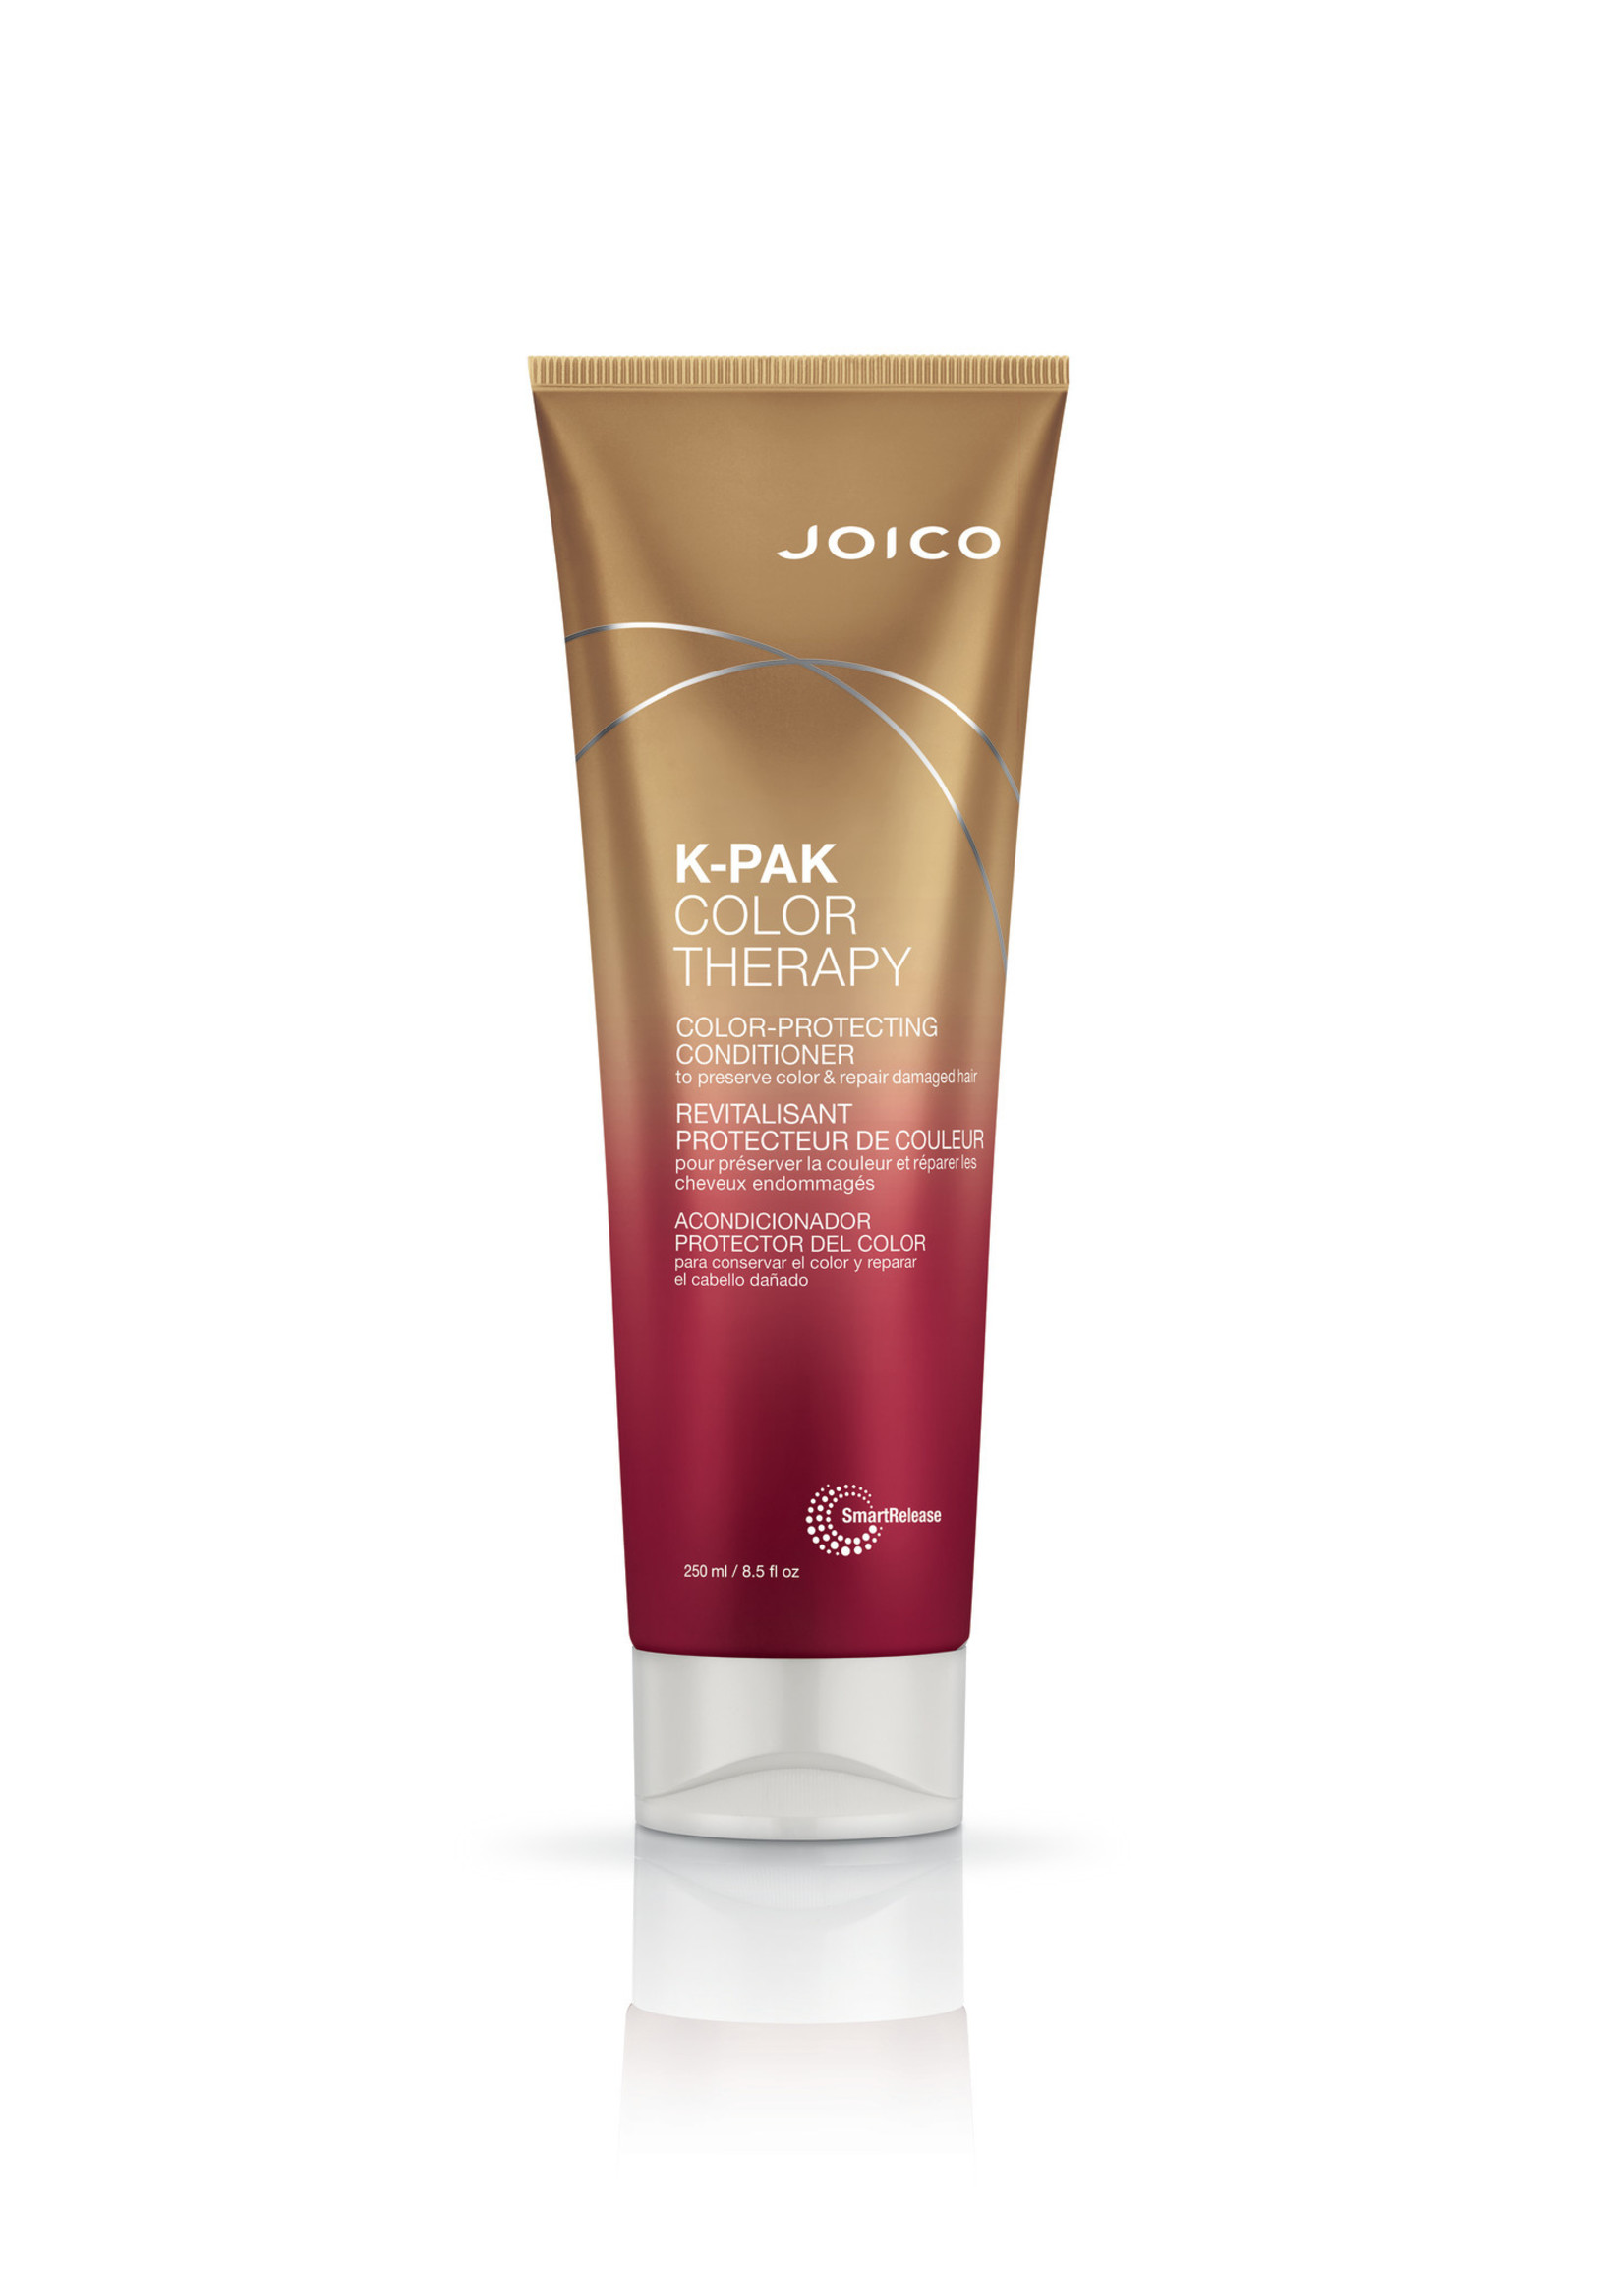 Joico Joico K-Pak Color Therapy Conditioner 250ml